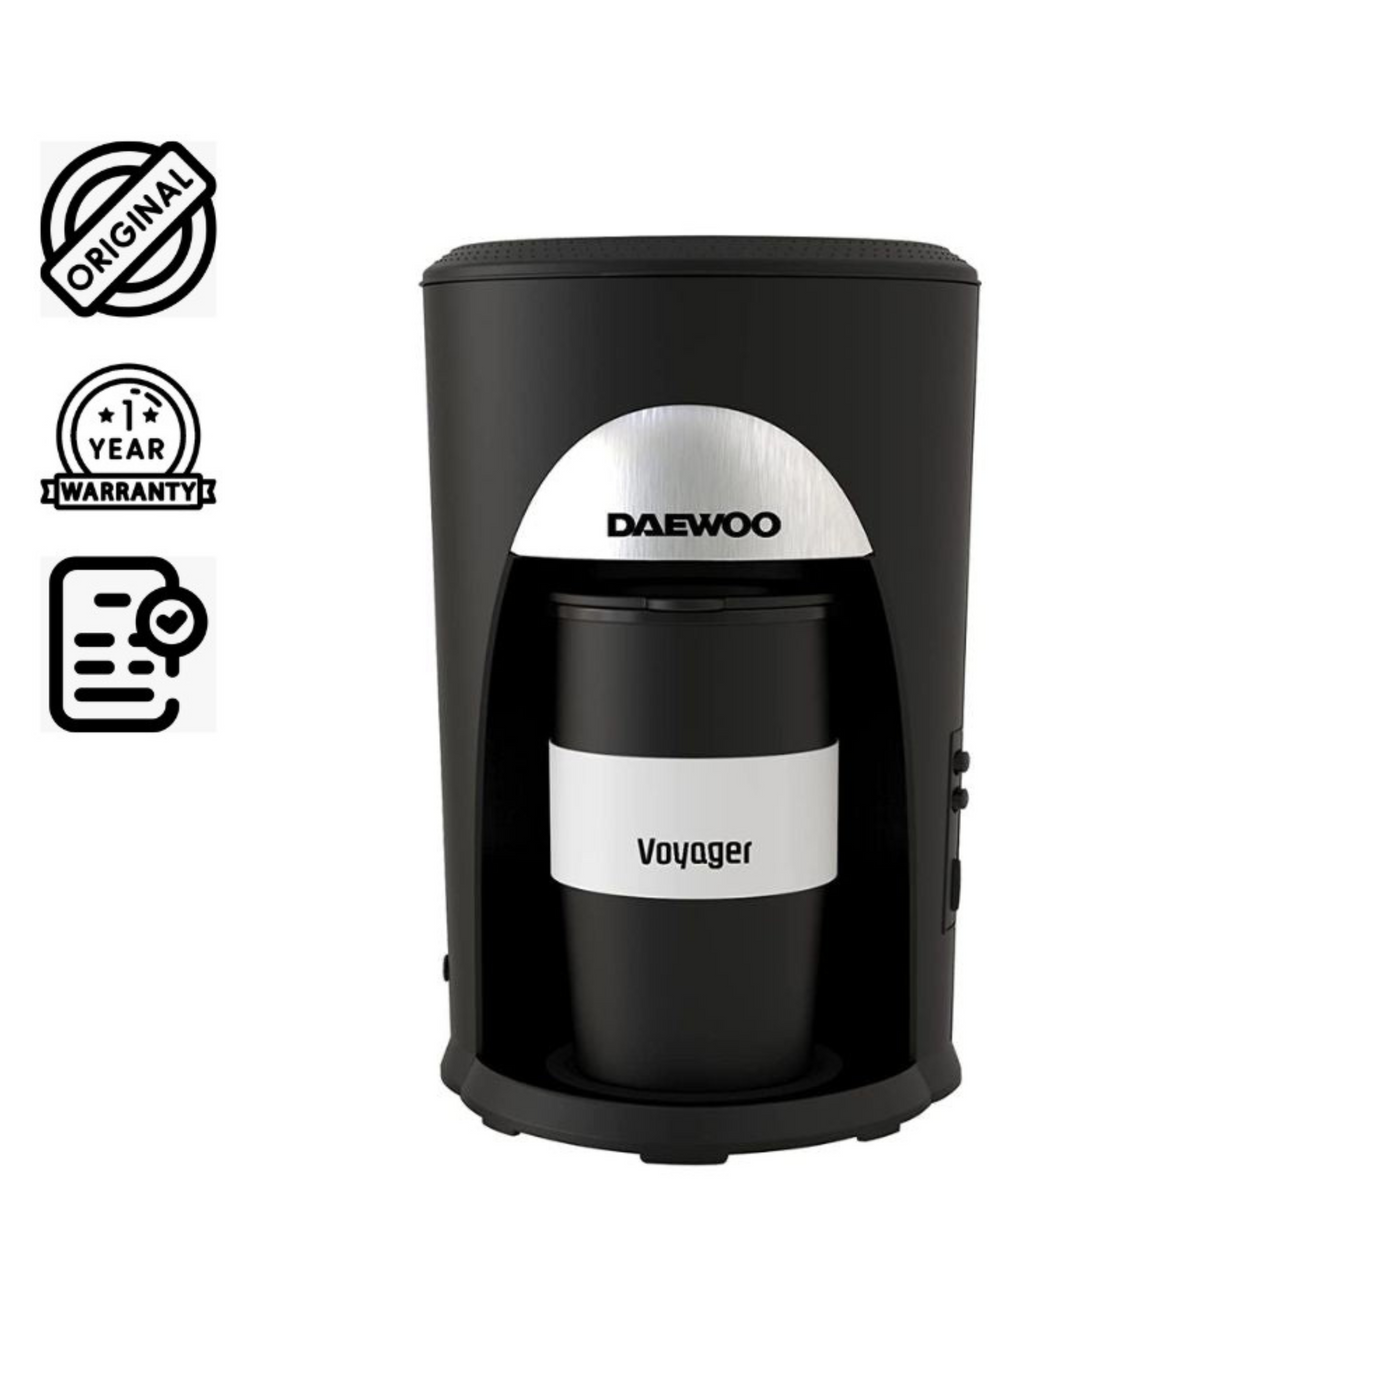 Brown Box Portable Single Cup Coffee Maker for Drip Coffee and Espresso with Travel Mug 500W